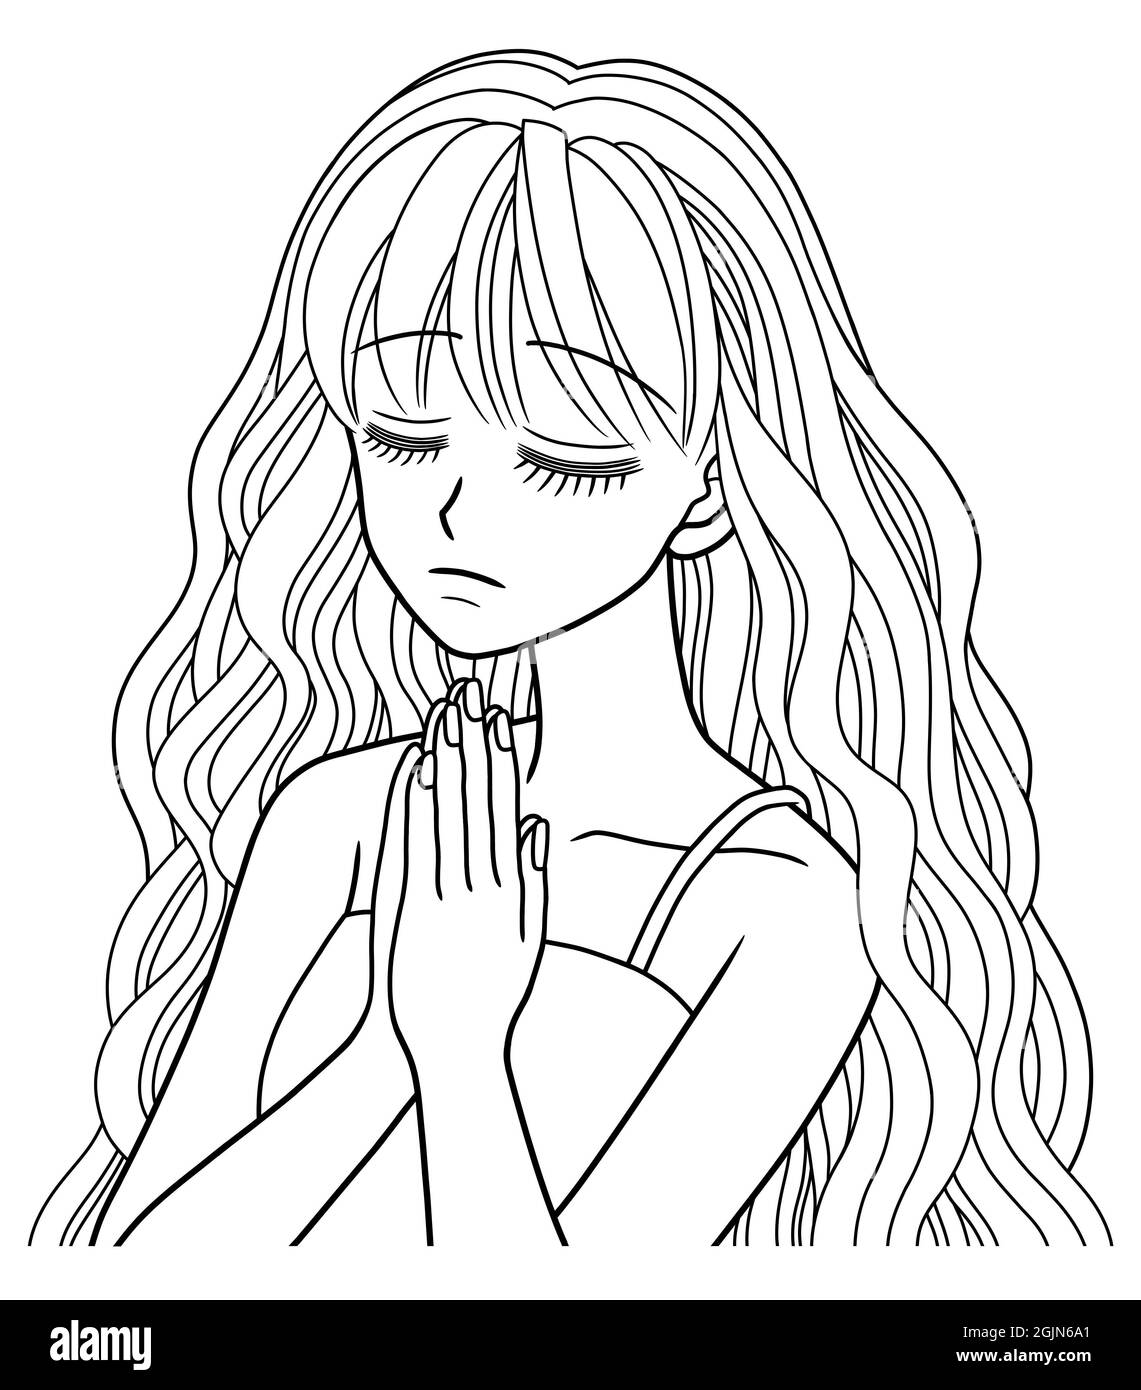 Line drawing of a young woman closing her eyes and holding her hands together in prayer Stock Photo